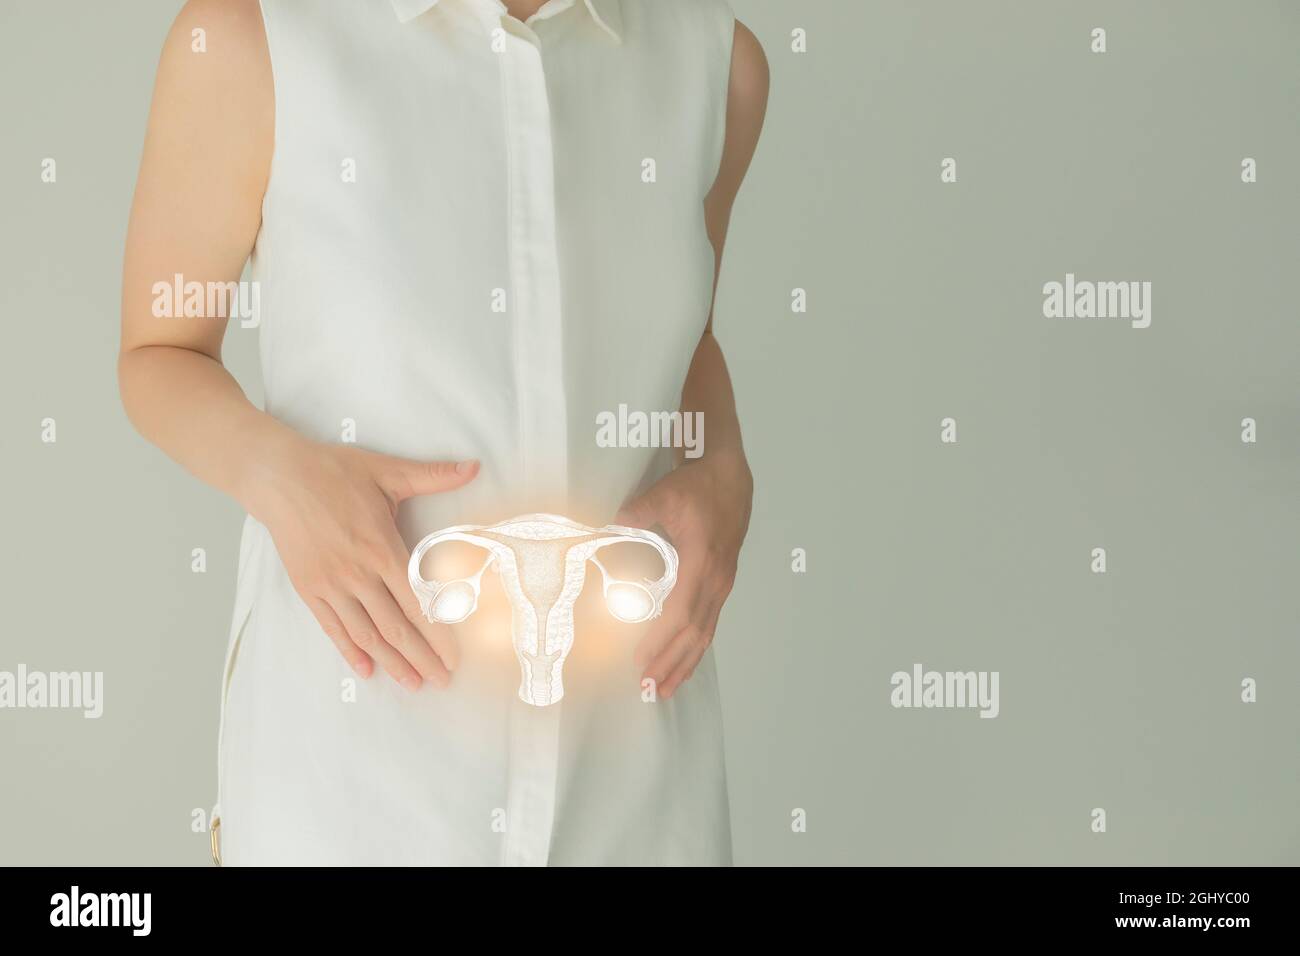 Unrecognizable female patient in white clothes, highlighted handrawn uterus in hands. Human reproductive system issues concept. Stock Photo